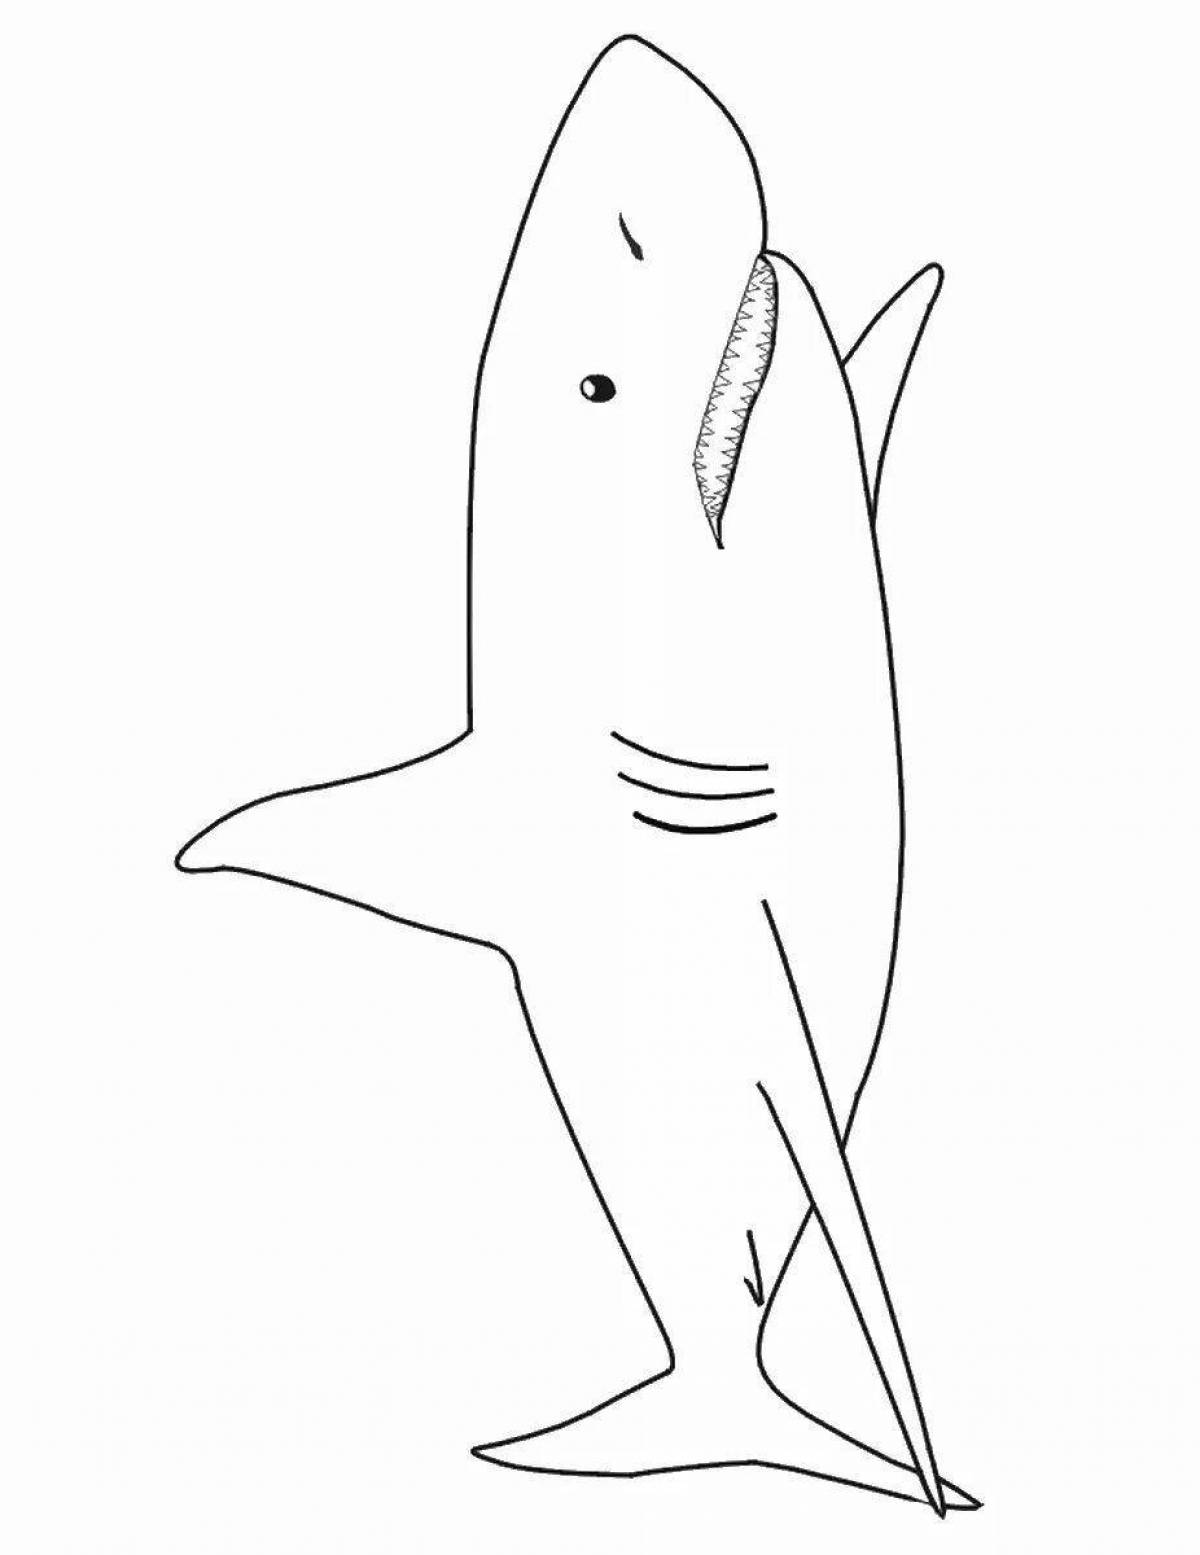 Outstanding ikea shark coloring page